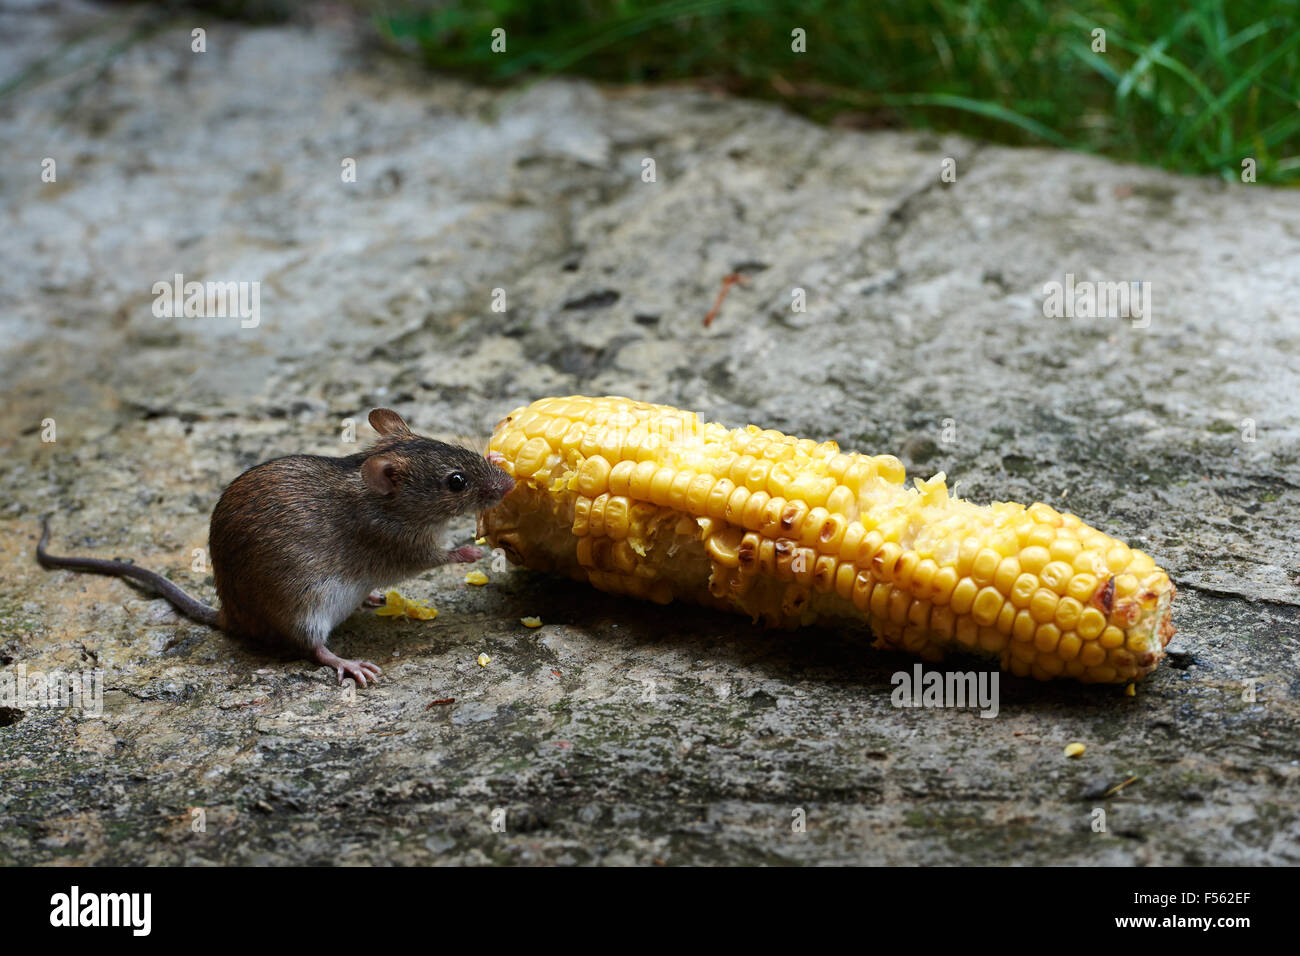 19.07.2015, Berlin, Berlin, Germany  - The fire mouse (Apodemus agrarius) counts within the family of muridae (Muridae) to the kind of wood mice (Apodemus). In English, the Fire Mouse Striped field mouse is called. 00Y150719D005CAROEX.JPG - NOT for SALE in G E R M A N Y, A U S T R I A, S W I T Z E R L A N D [MODEL RELEASE: NOT APPLICABLE, PROPERTY RELEASE: NO (c) caro photo agency / Teich, http://www.caro-images.pl, info@carofoto.pl - In case of using the picture for non-journalistic purposes, please contact the agency - the picture is subject to royalty!] Stock Photo